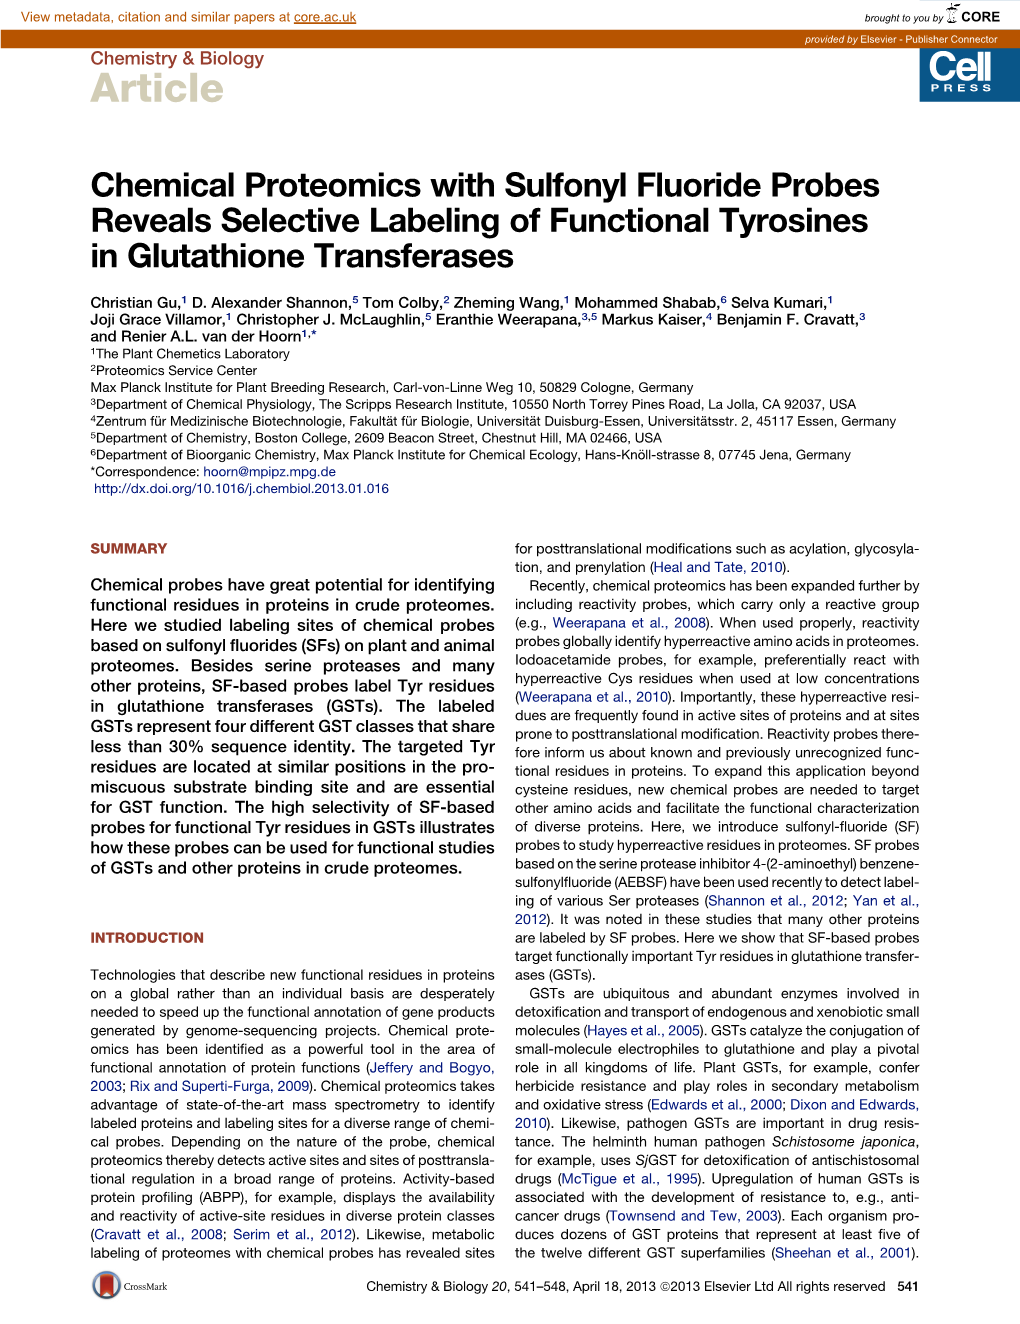 Chemical Proteomics with Sulfonyl Fluoride Probes Reveals Selective Labeling of Functional Tyrosines in Glutathione Transferases